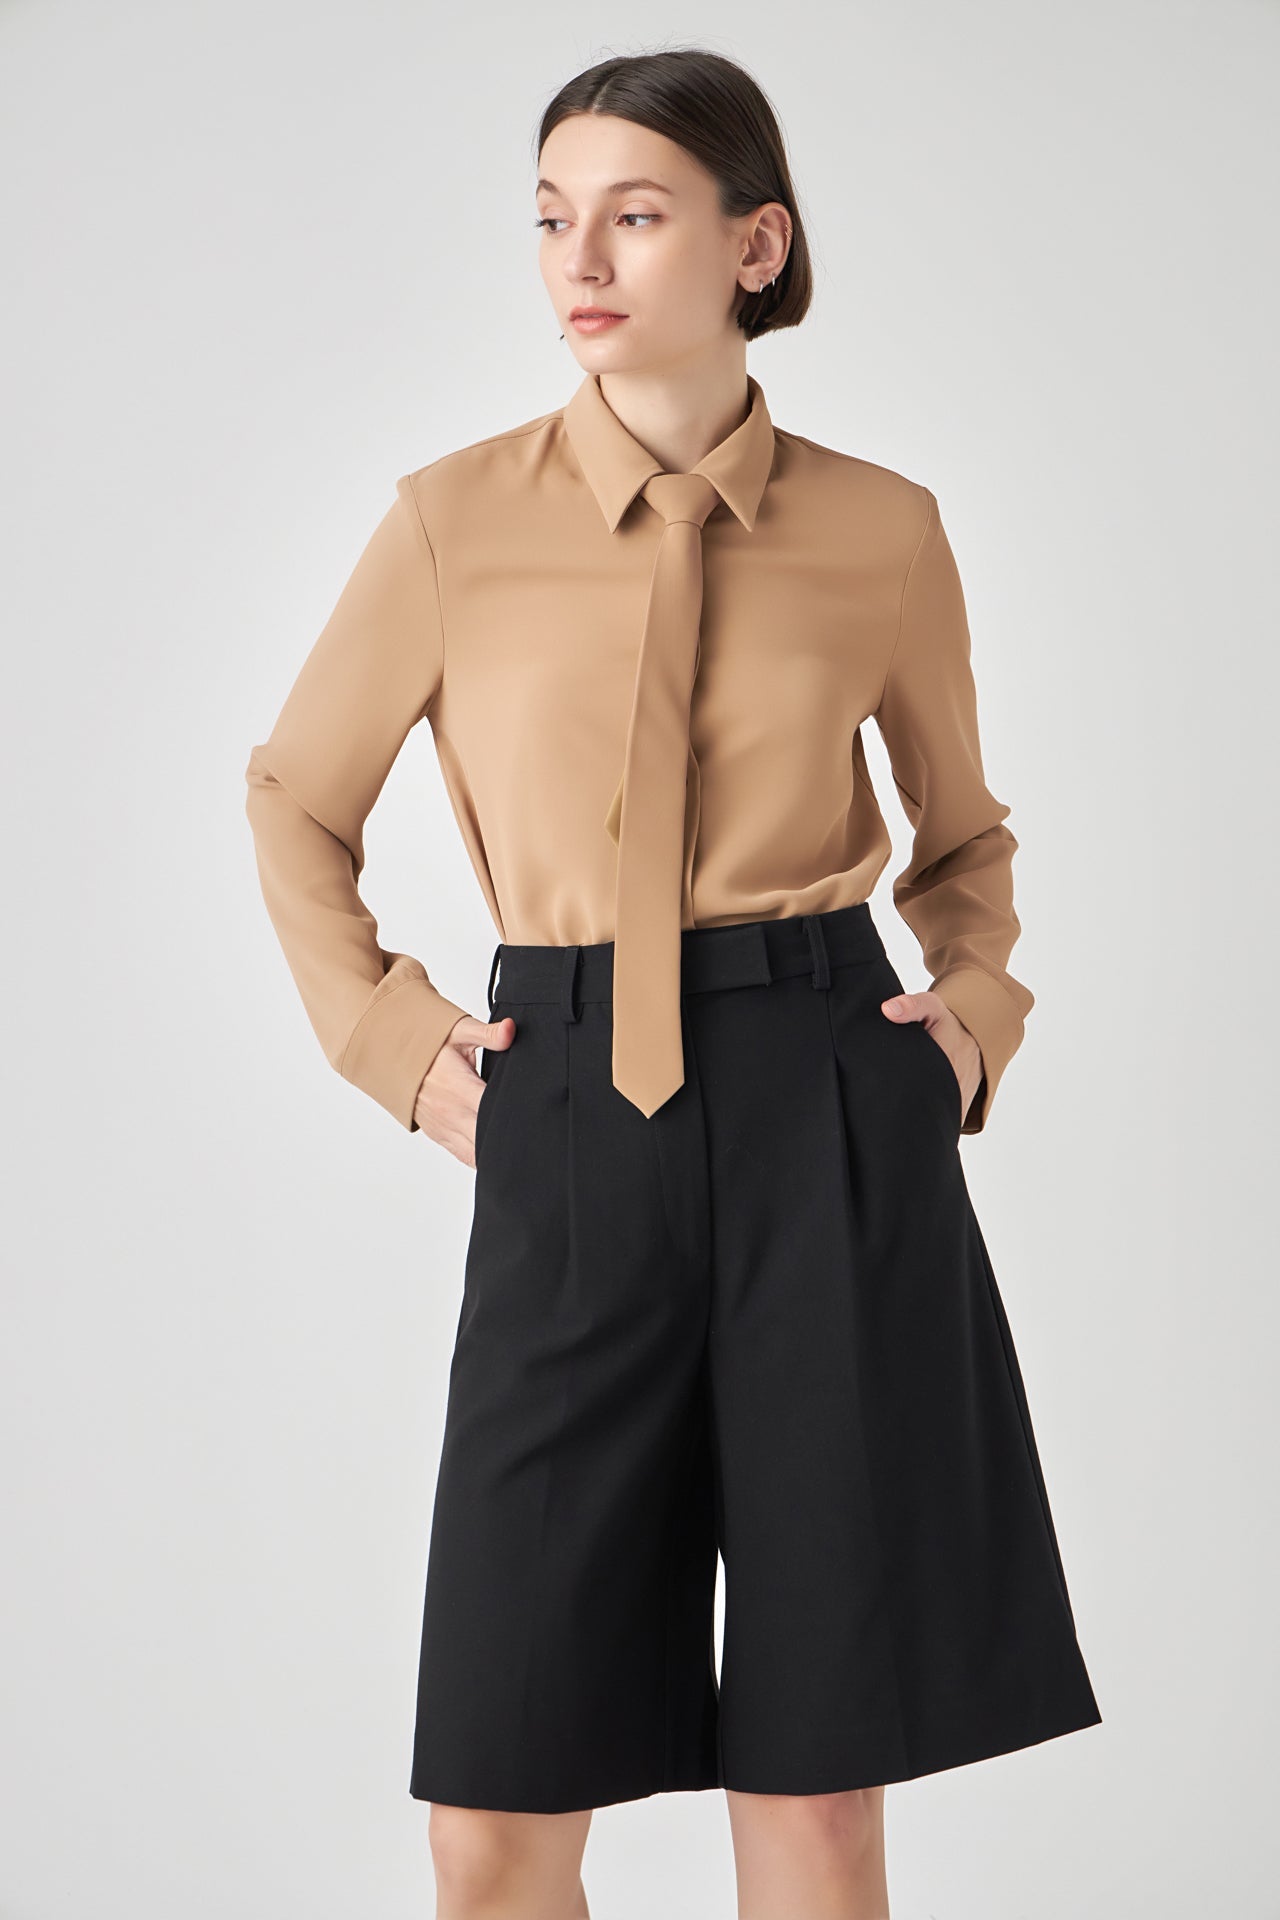 GREY LAB - Lightweight Collared Dress Shirt - SHIRTS & BLOUSES available at Objectrare